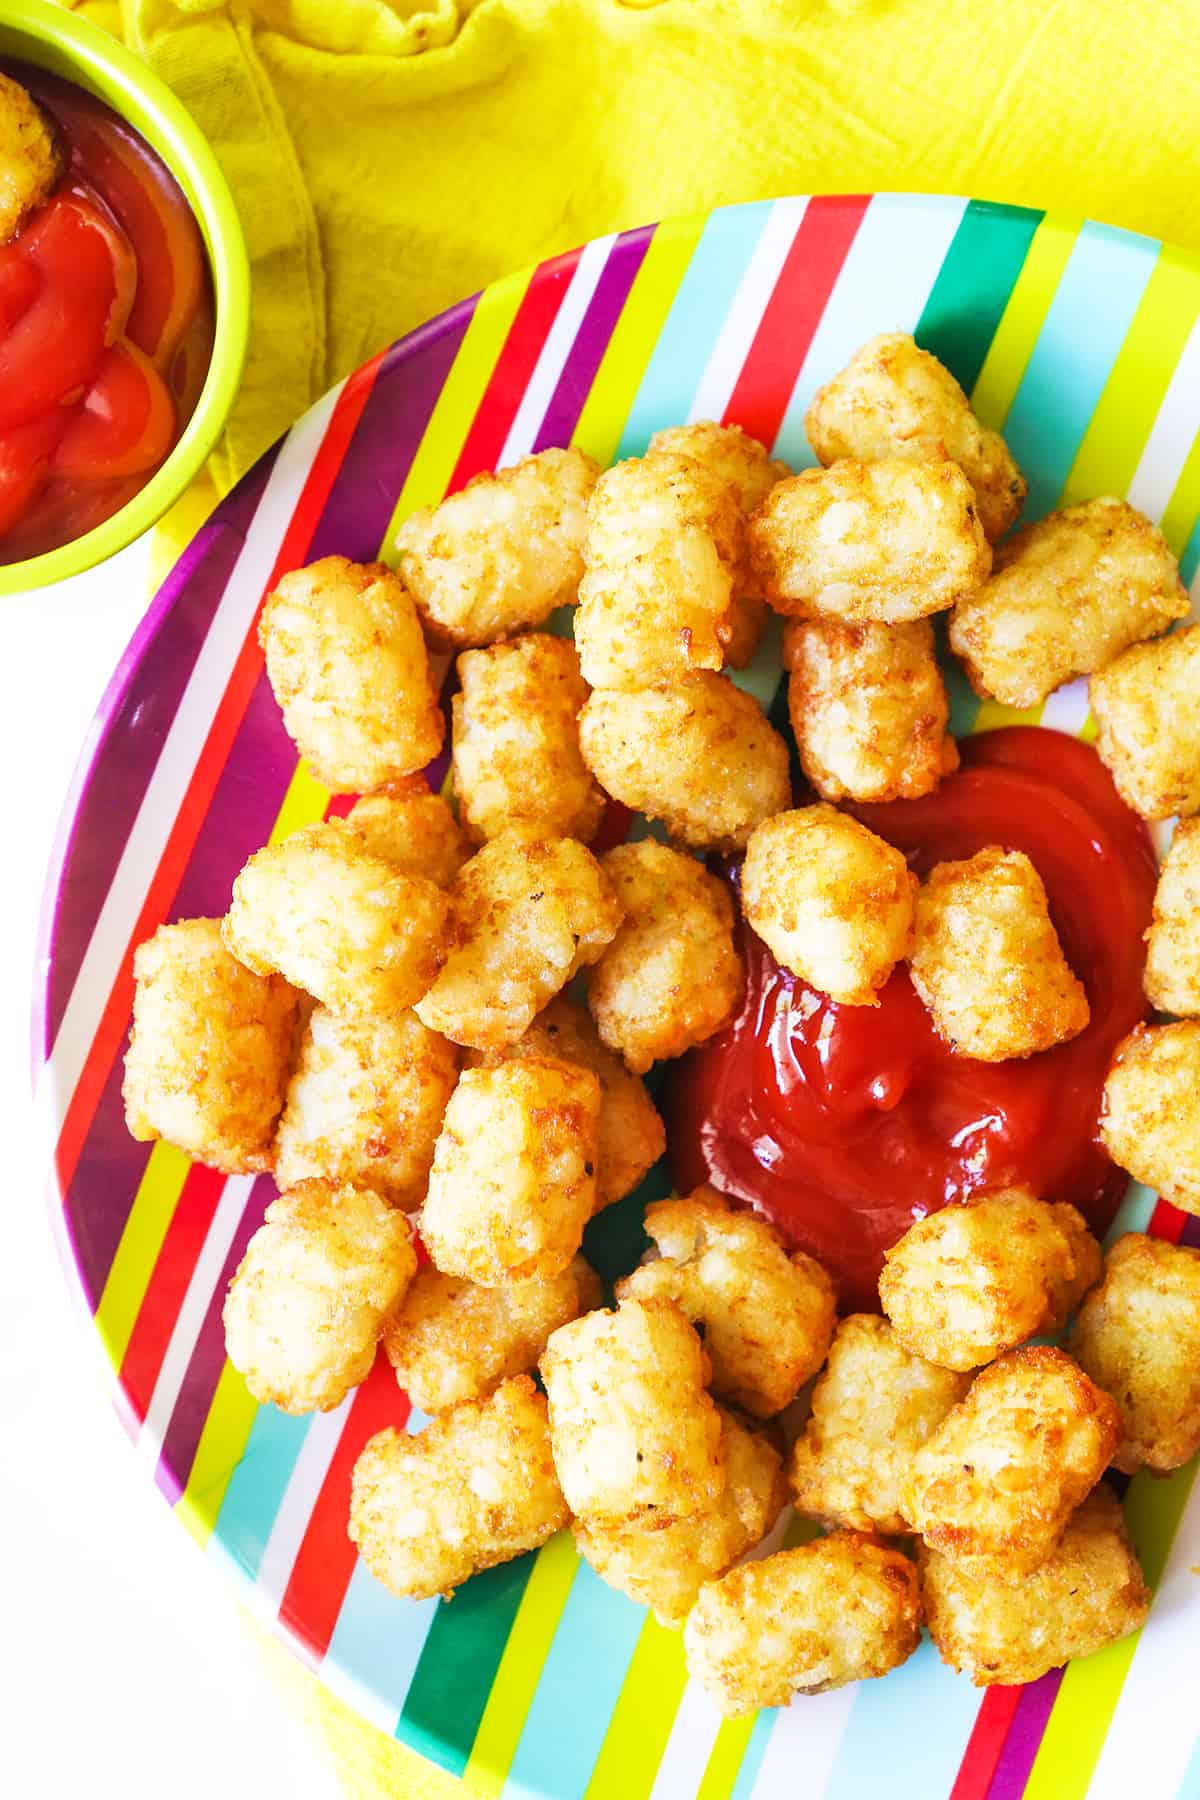 Plate filled with air fryer tater tots with ketchup in the center.